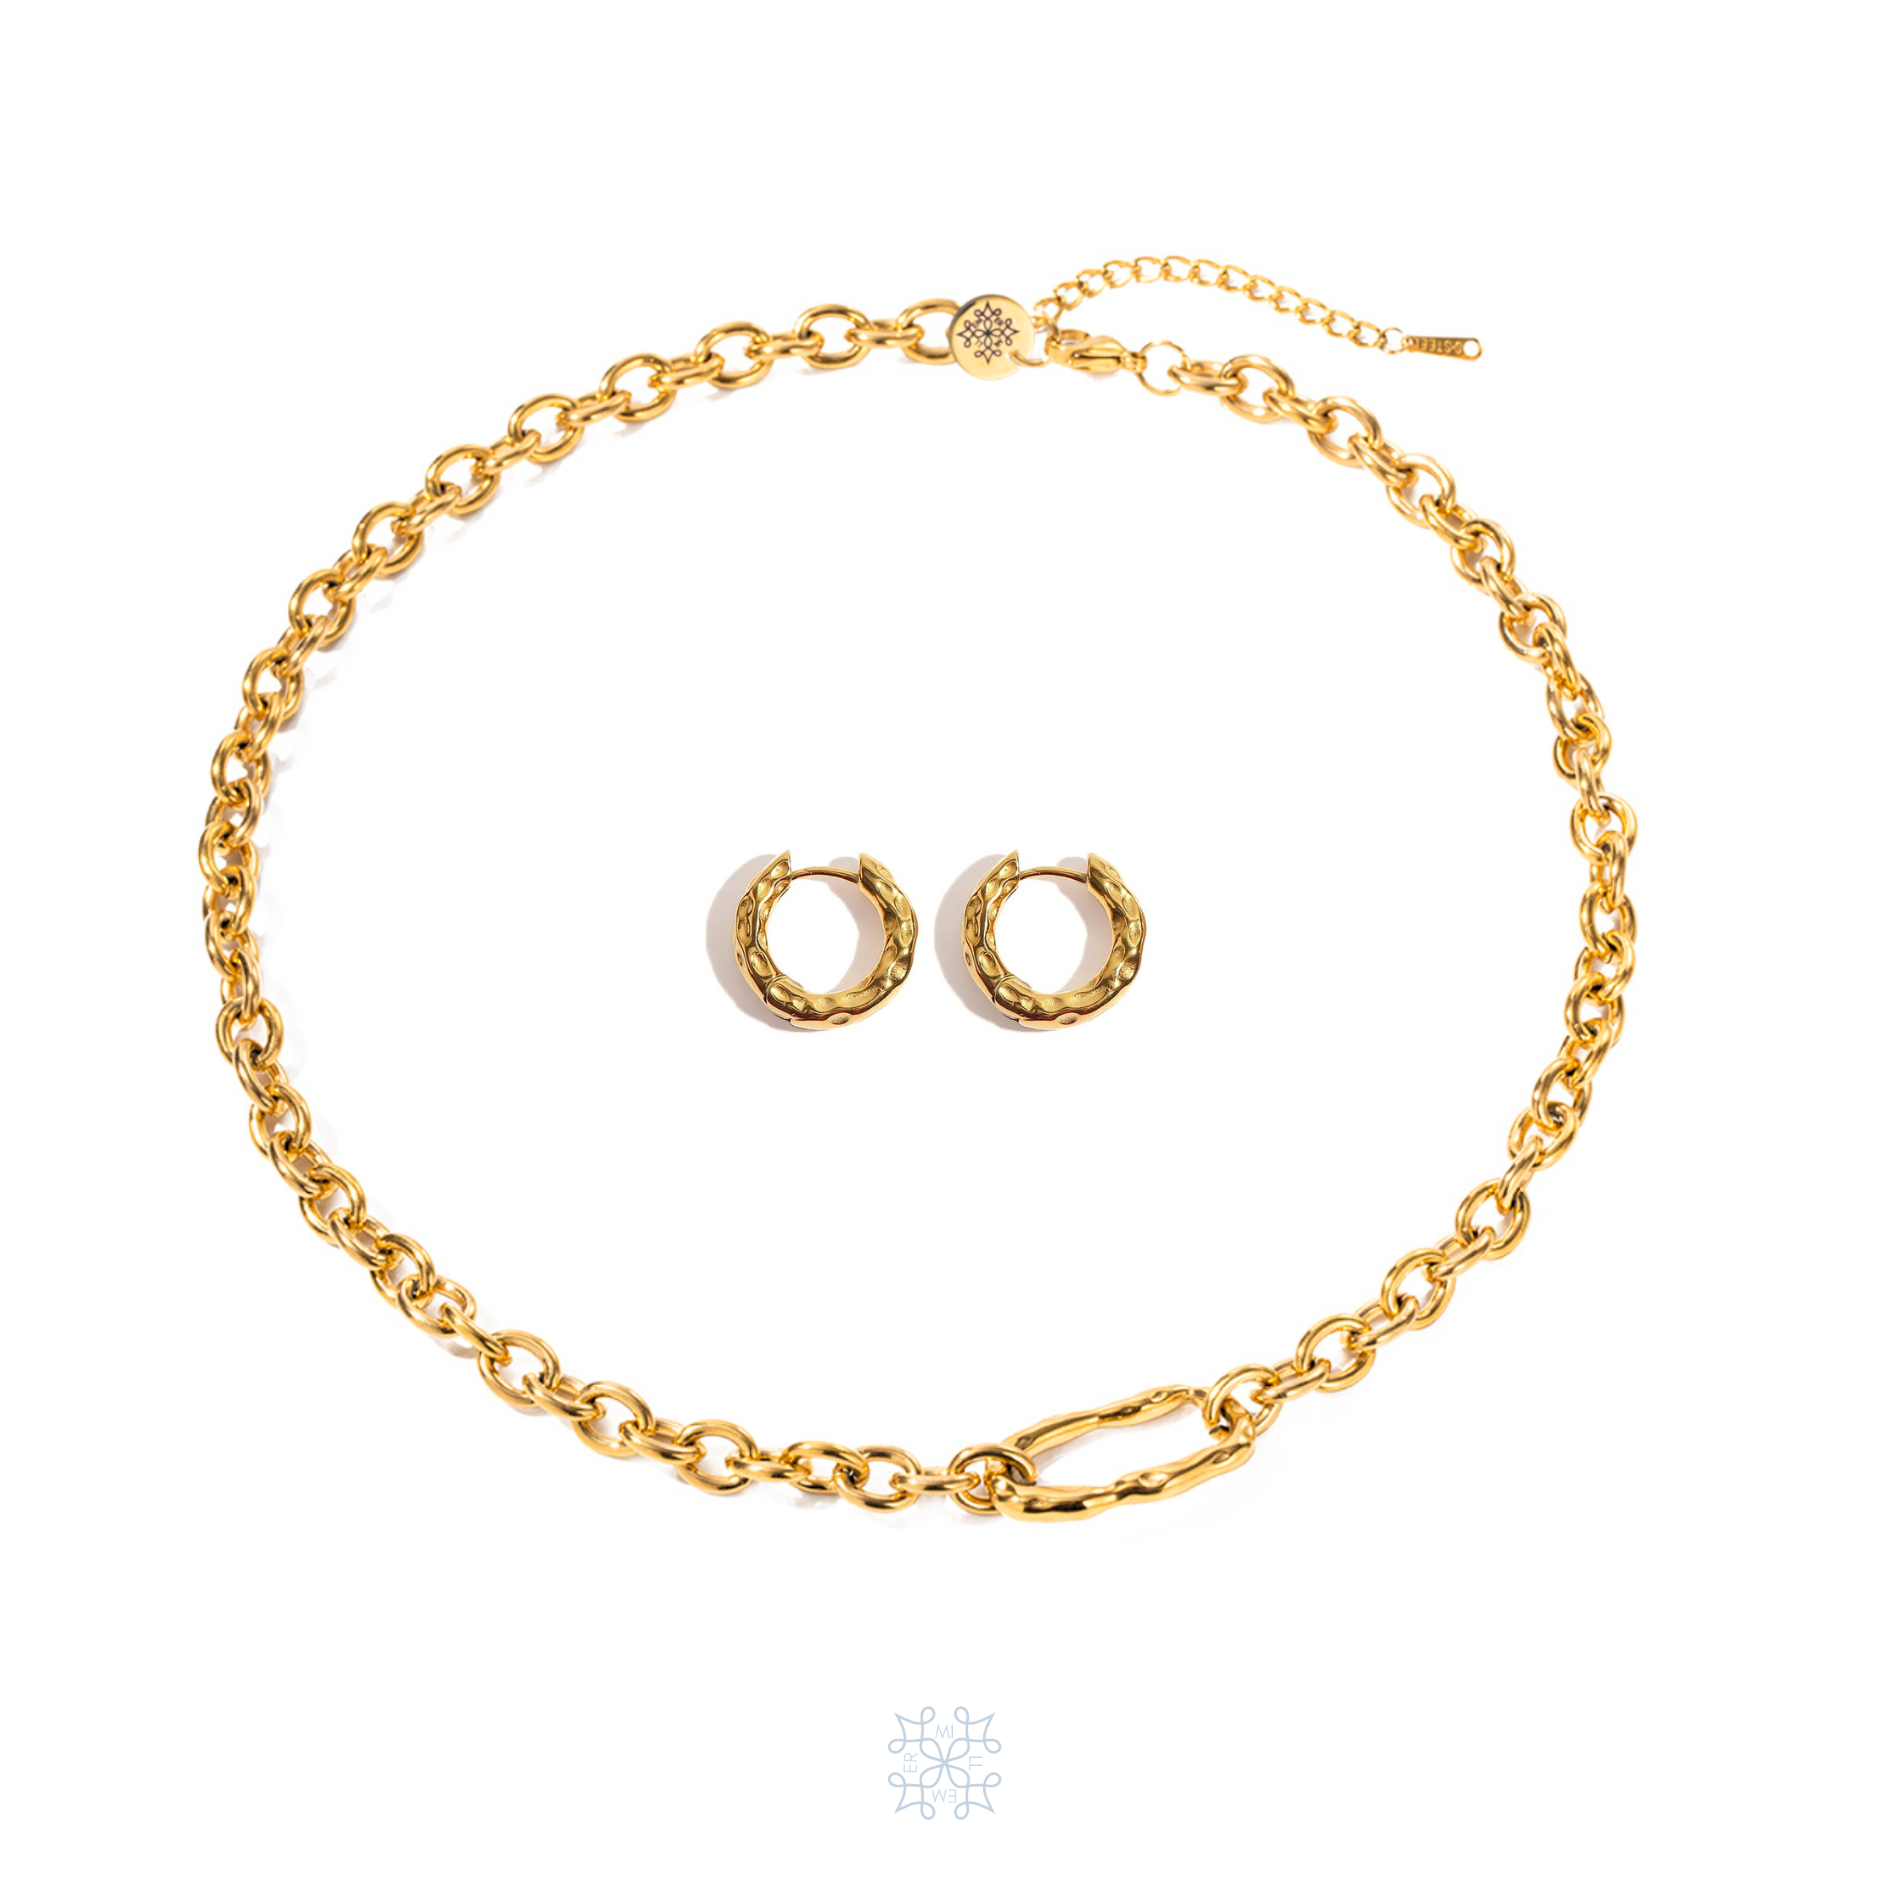 DUNE Gold Set. The set has a pair of gold huggies hoop earrings and a chain necklace. The shape of the hopps is irregular and is inspired by eaterdrops on sand dunes. The same detail is in the side of gold chain necklace.